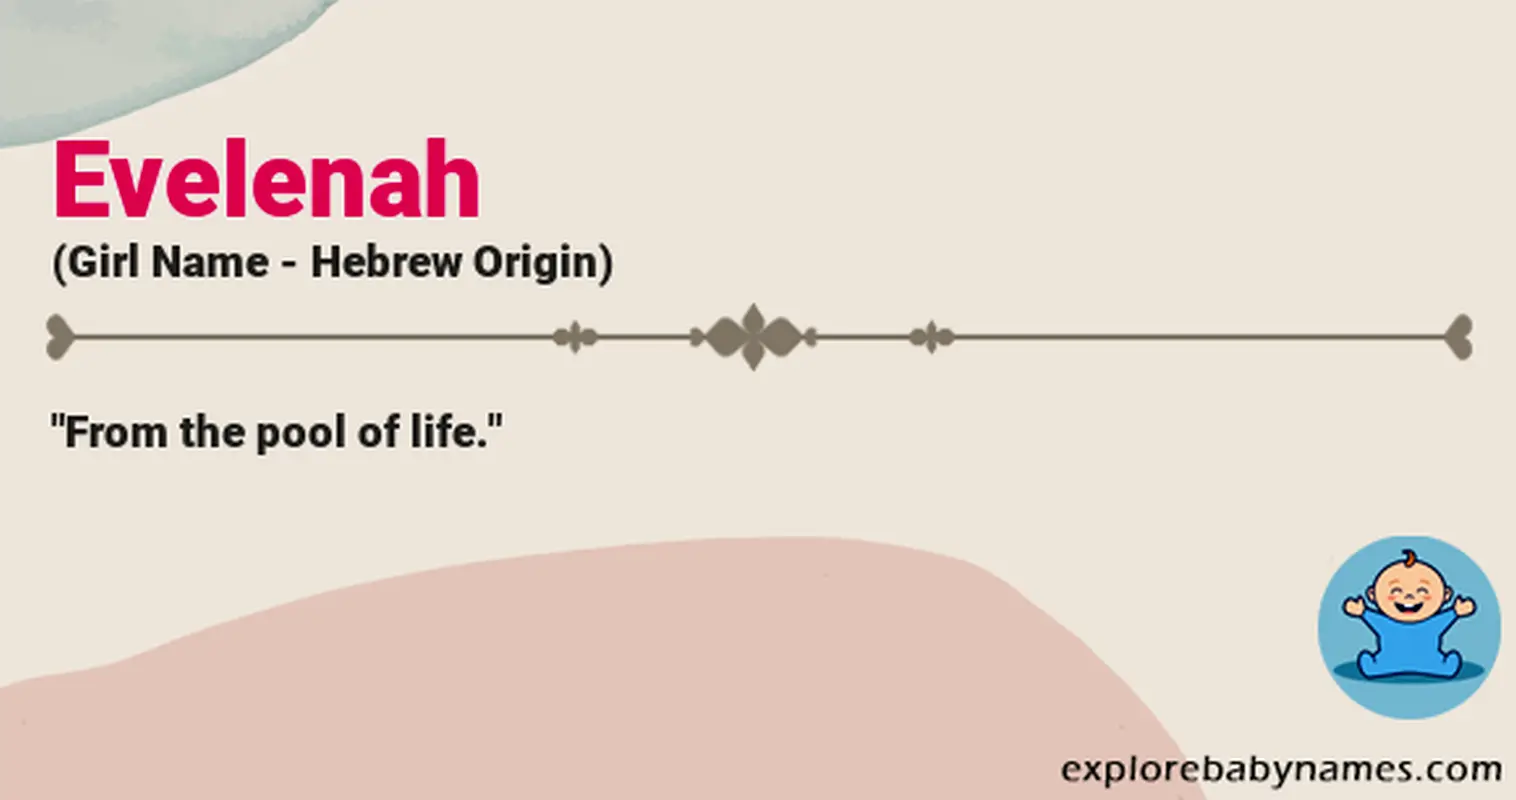 Meaning of Evelenah